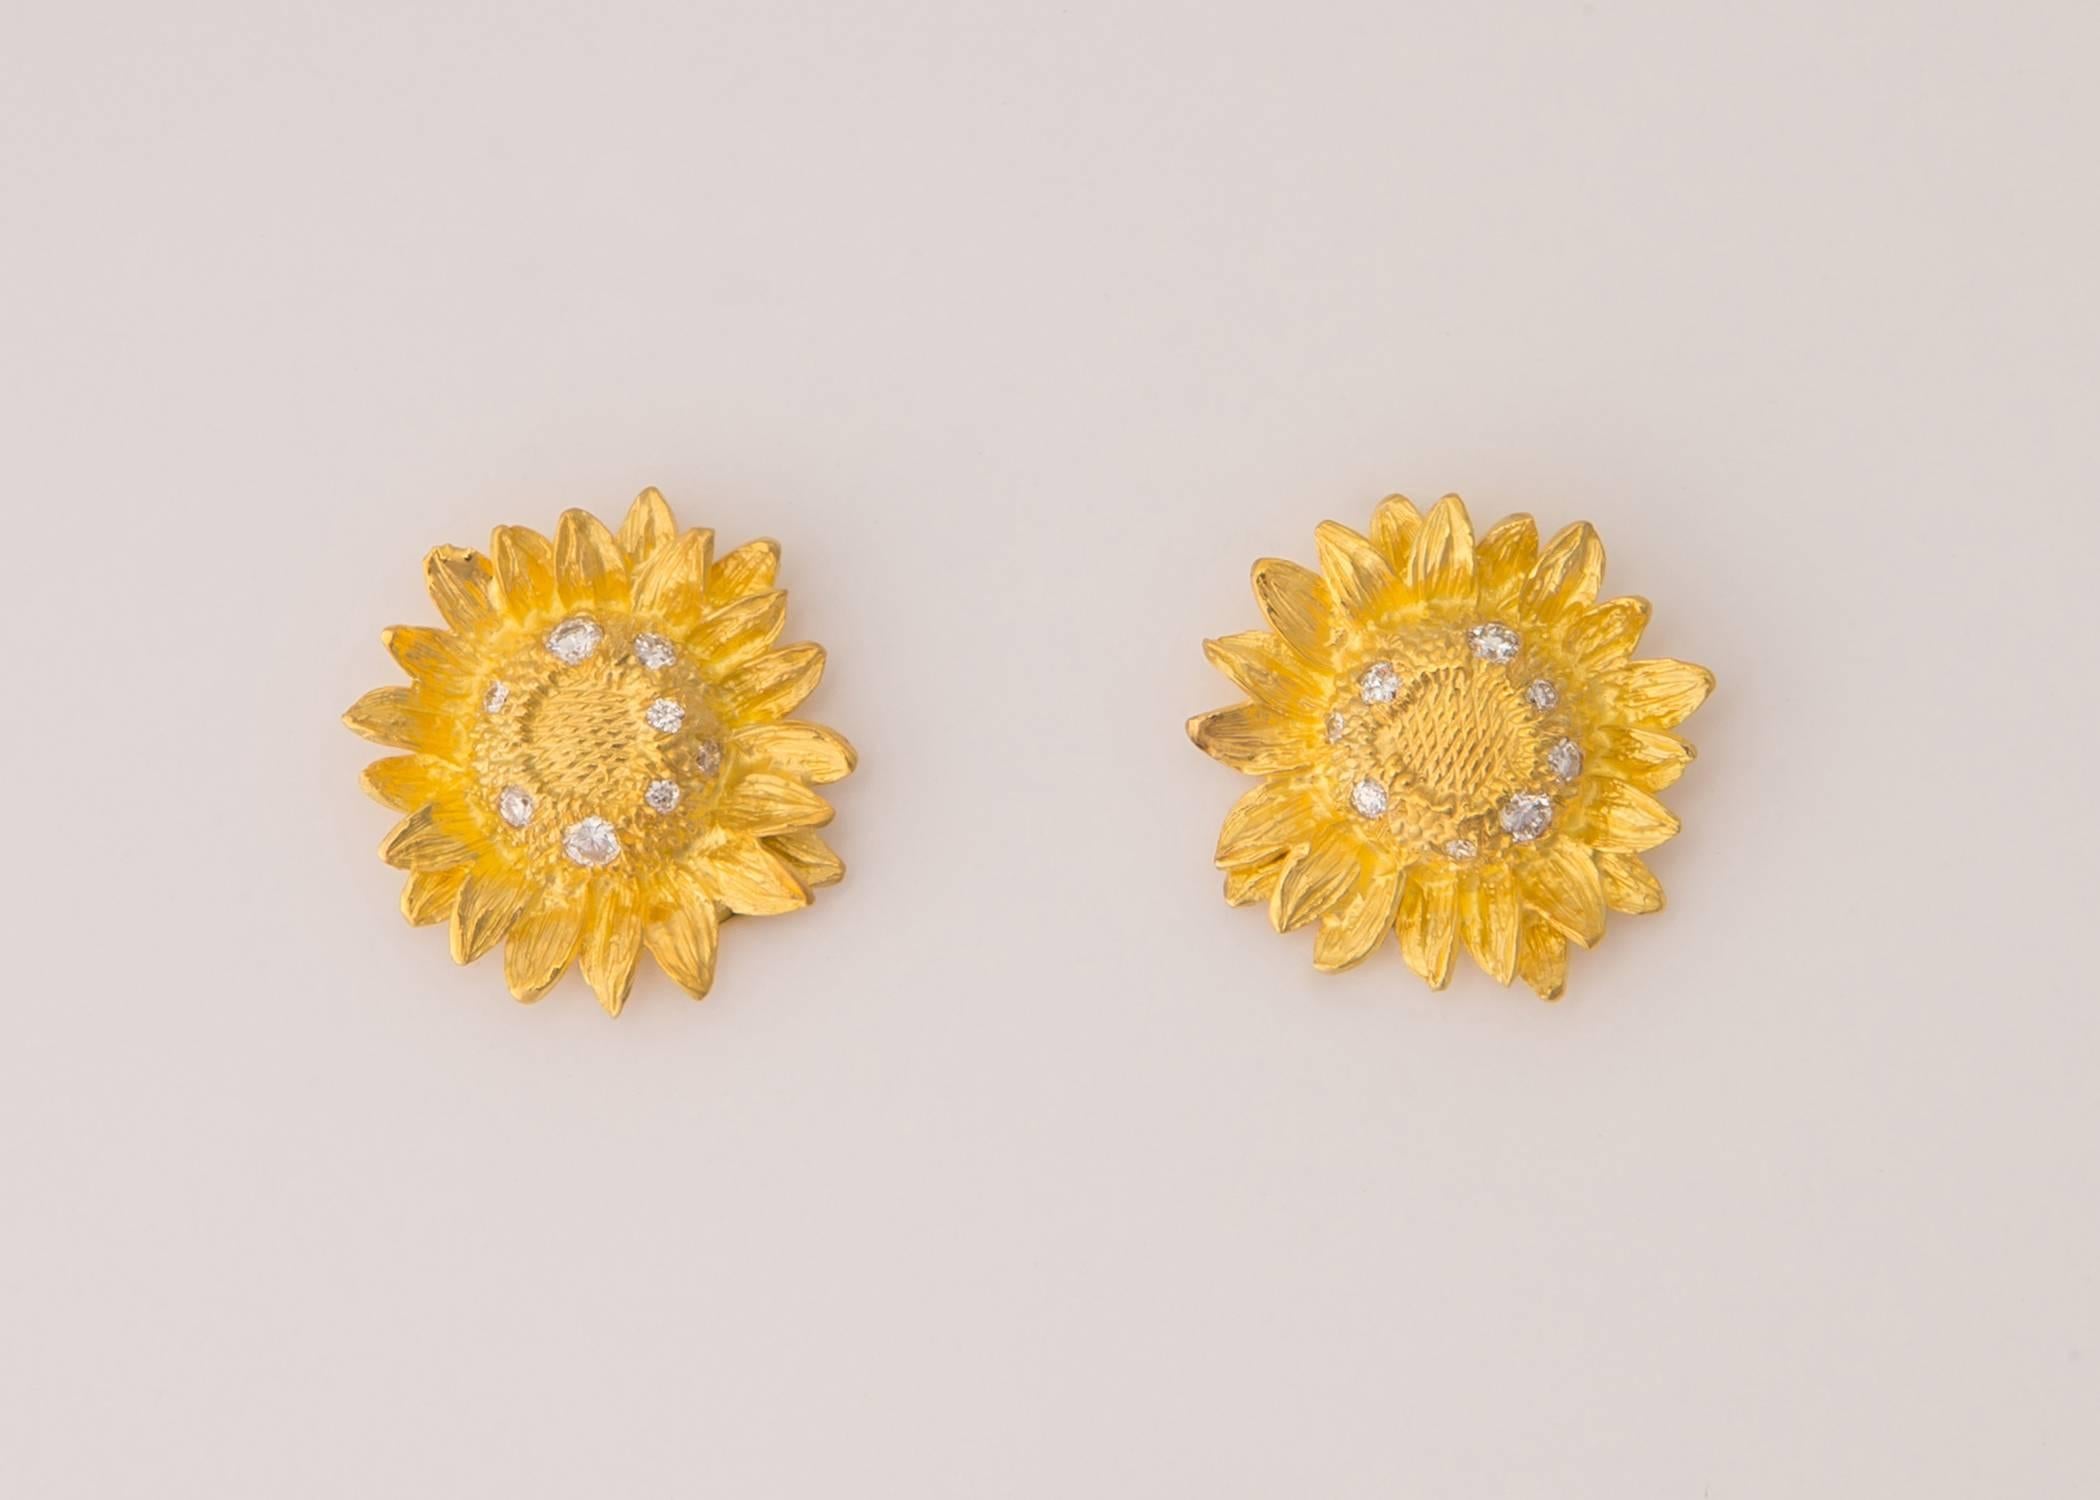 The iconic British Jeweler Asprey was founded in 1781.  They are famous for their sun flower earrings. Great detailing and texture with 16 brilliant diamond sprinkled in make this truly special. At 3/4's of an inch its an easy to wear choice. Please